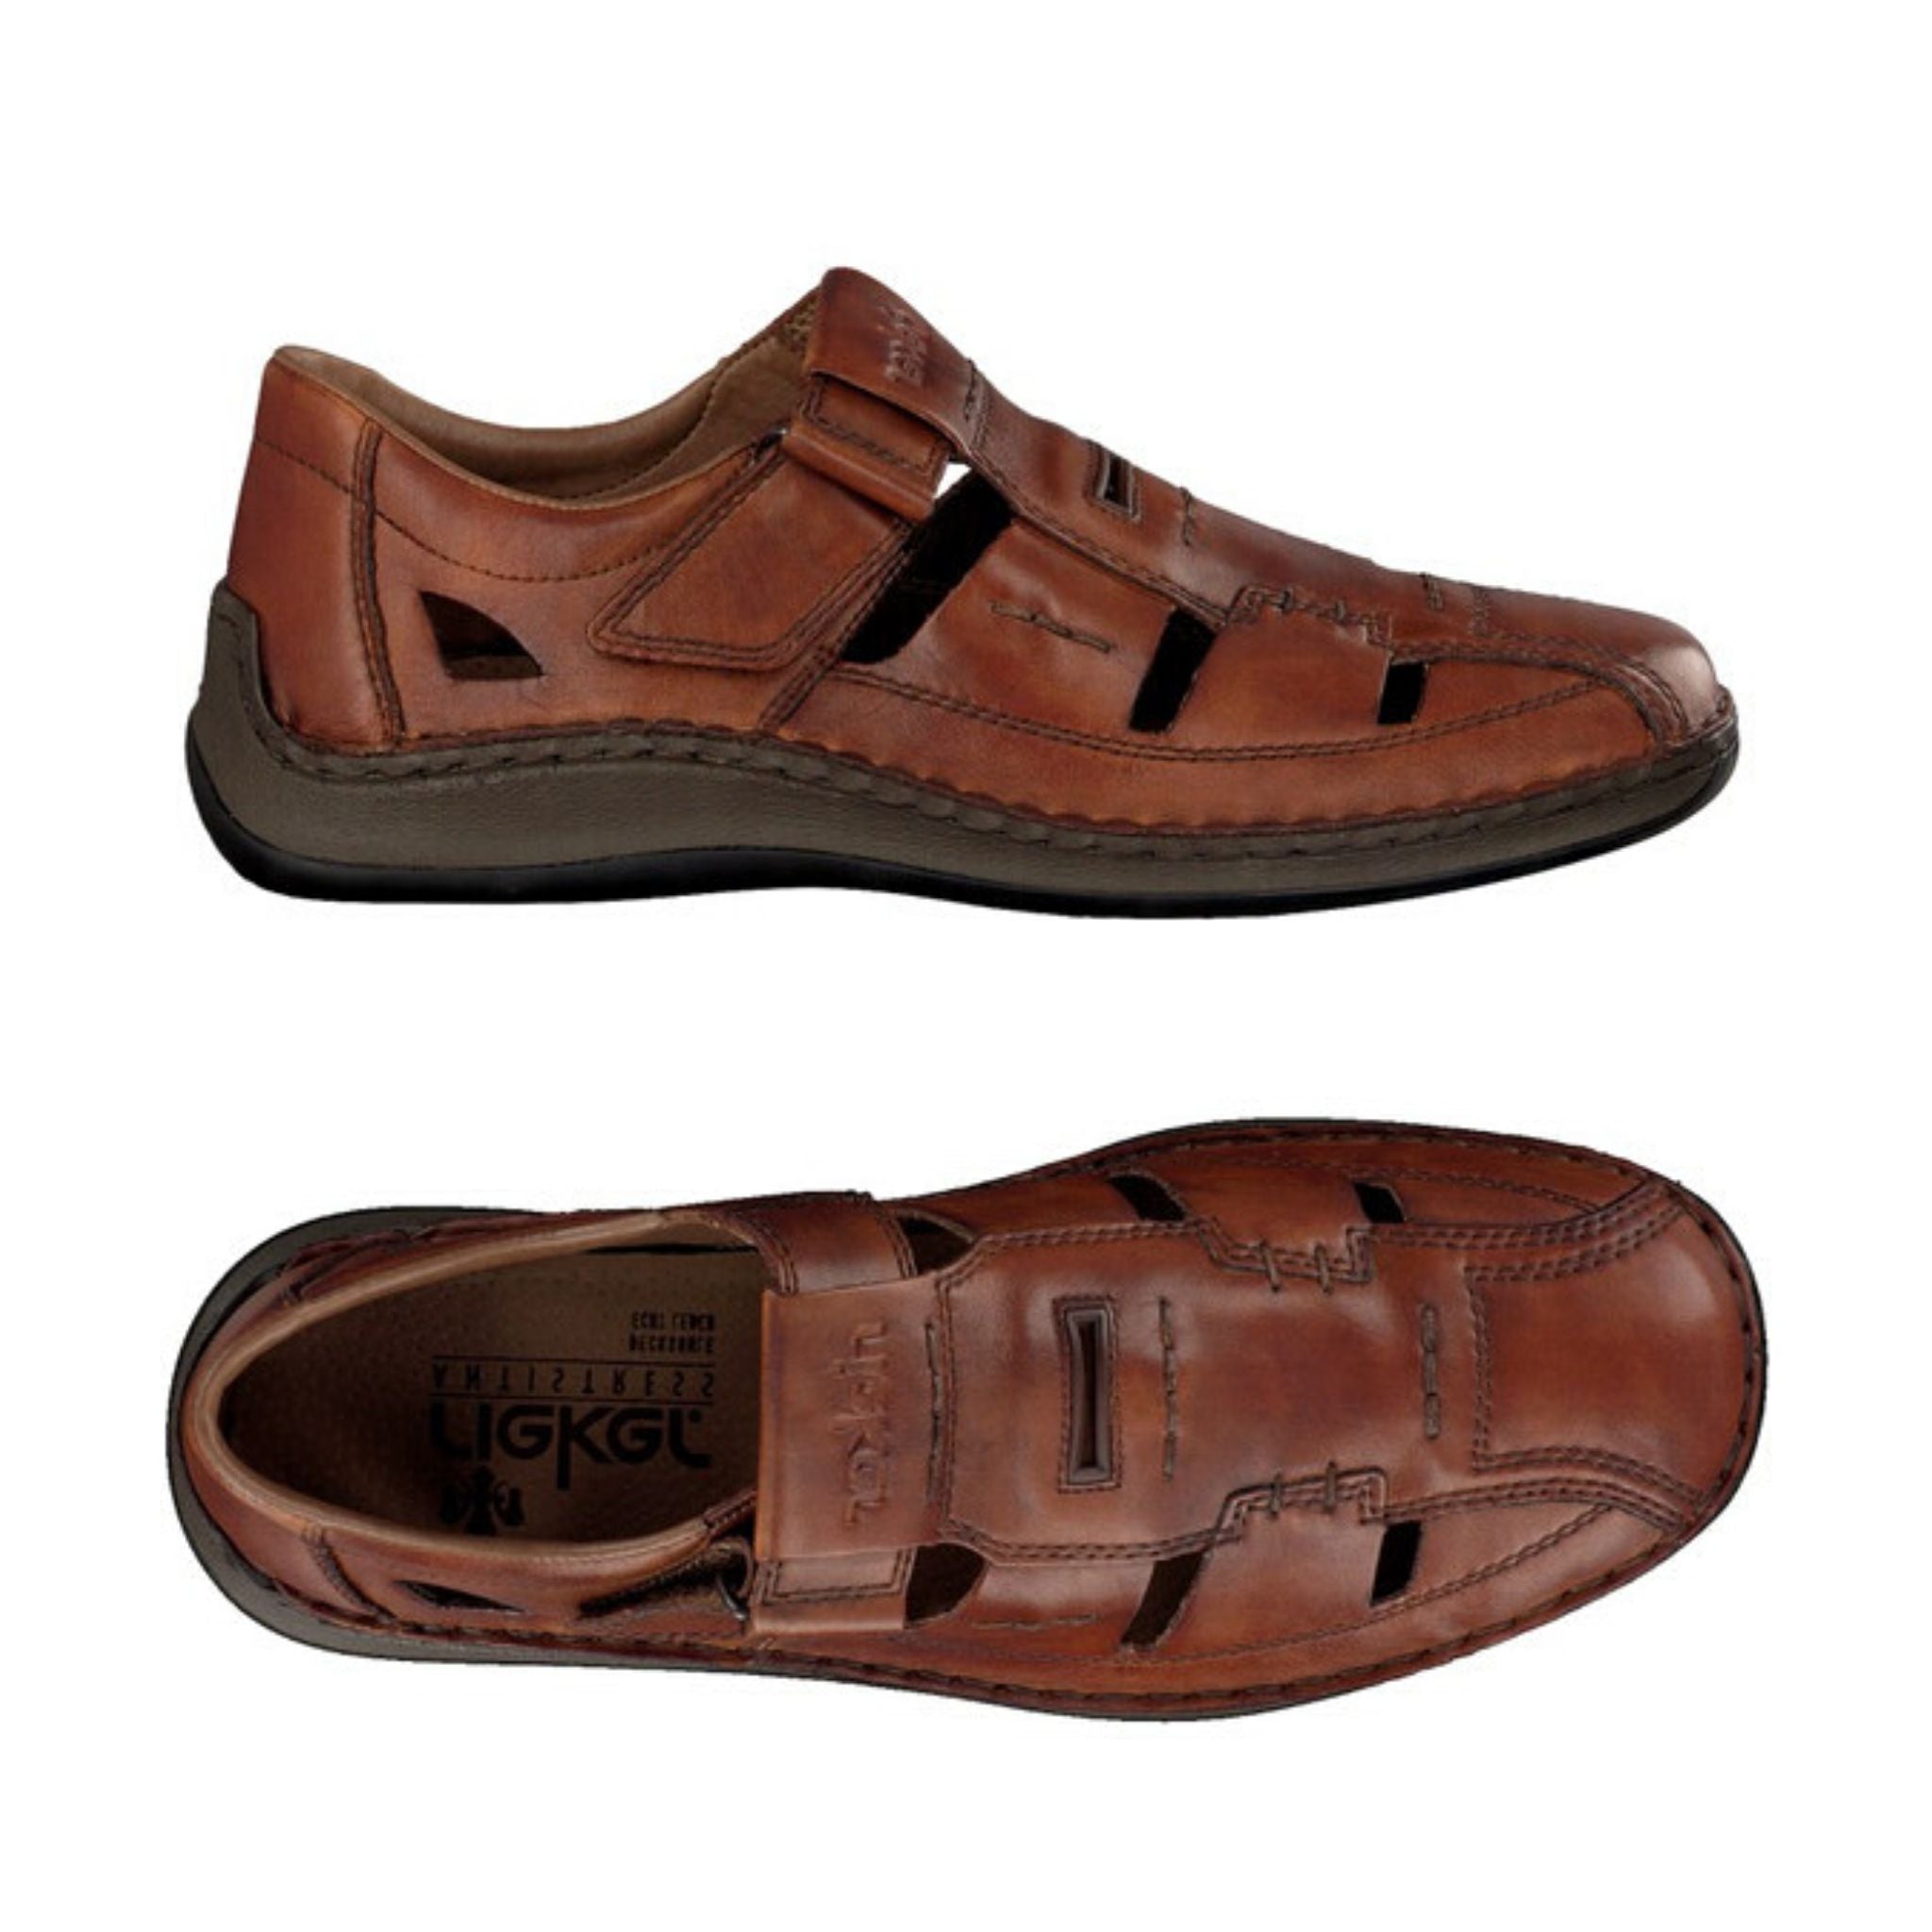 Top and side view of men&#39;s brown leather fisherman sandal made by Rieker.